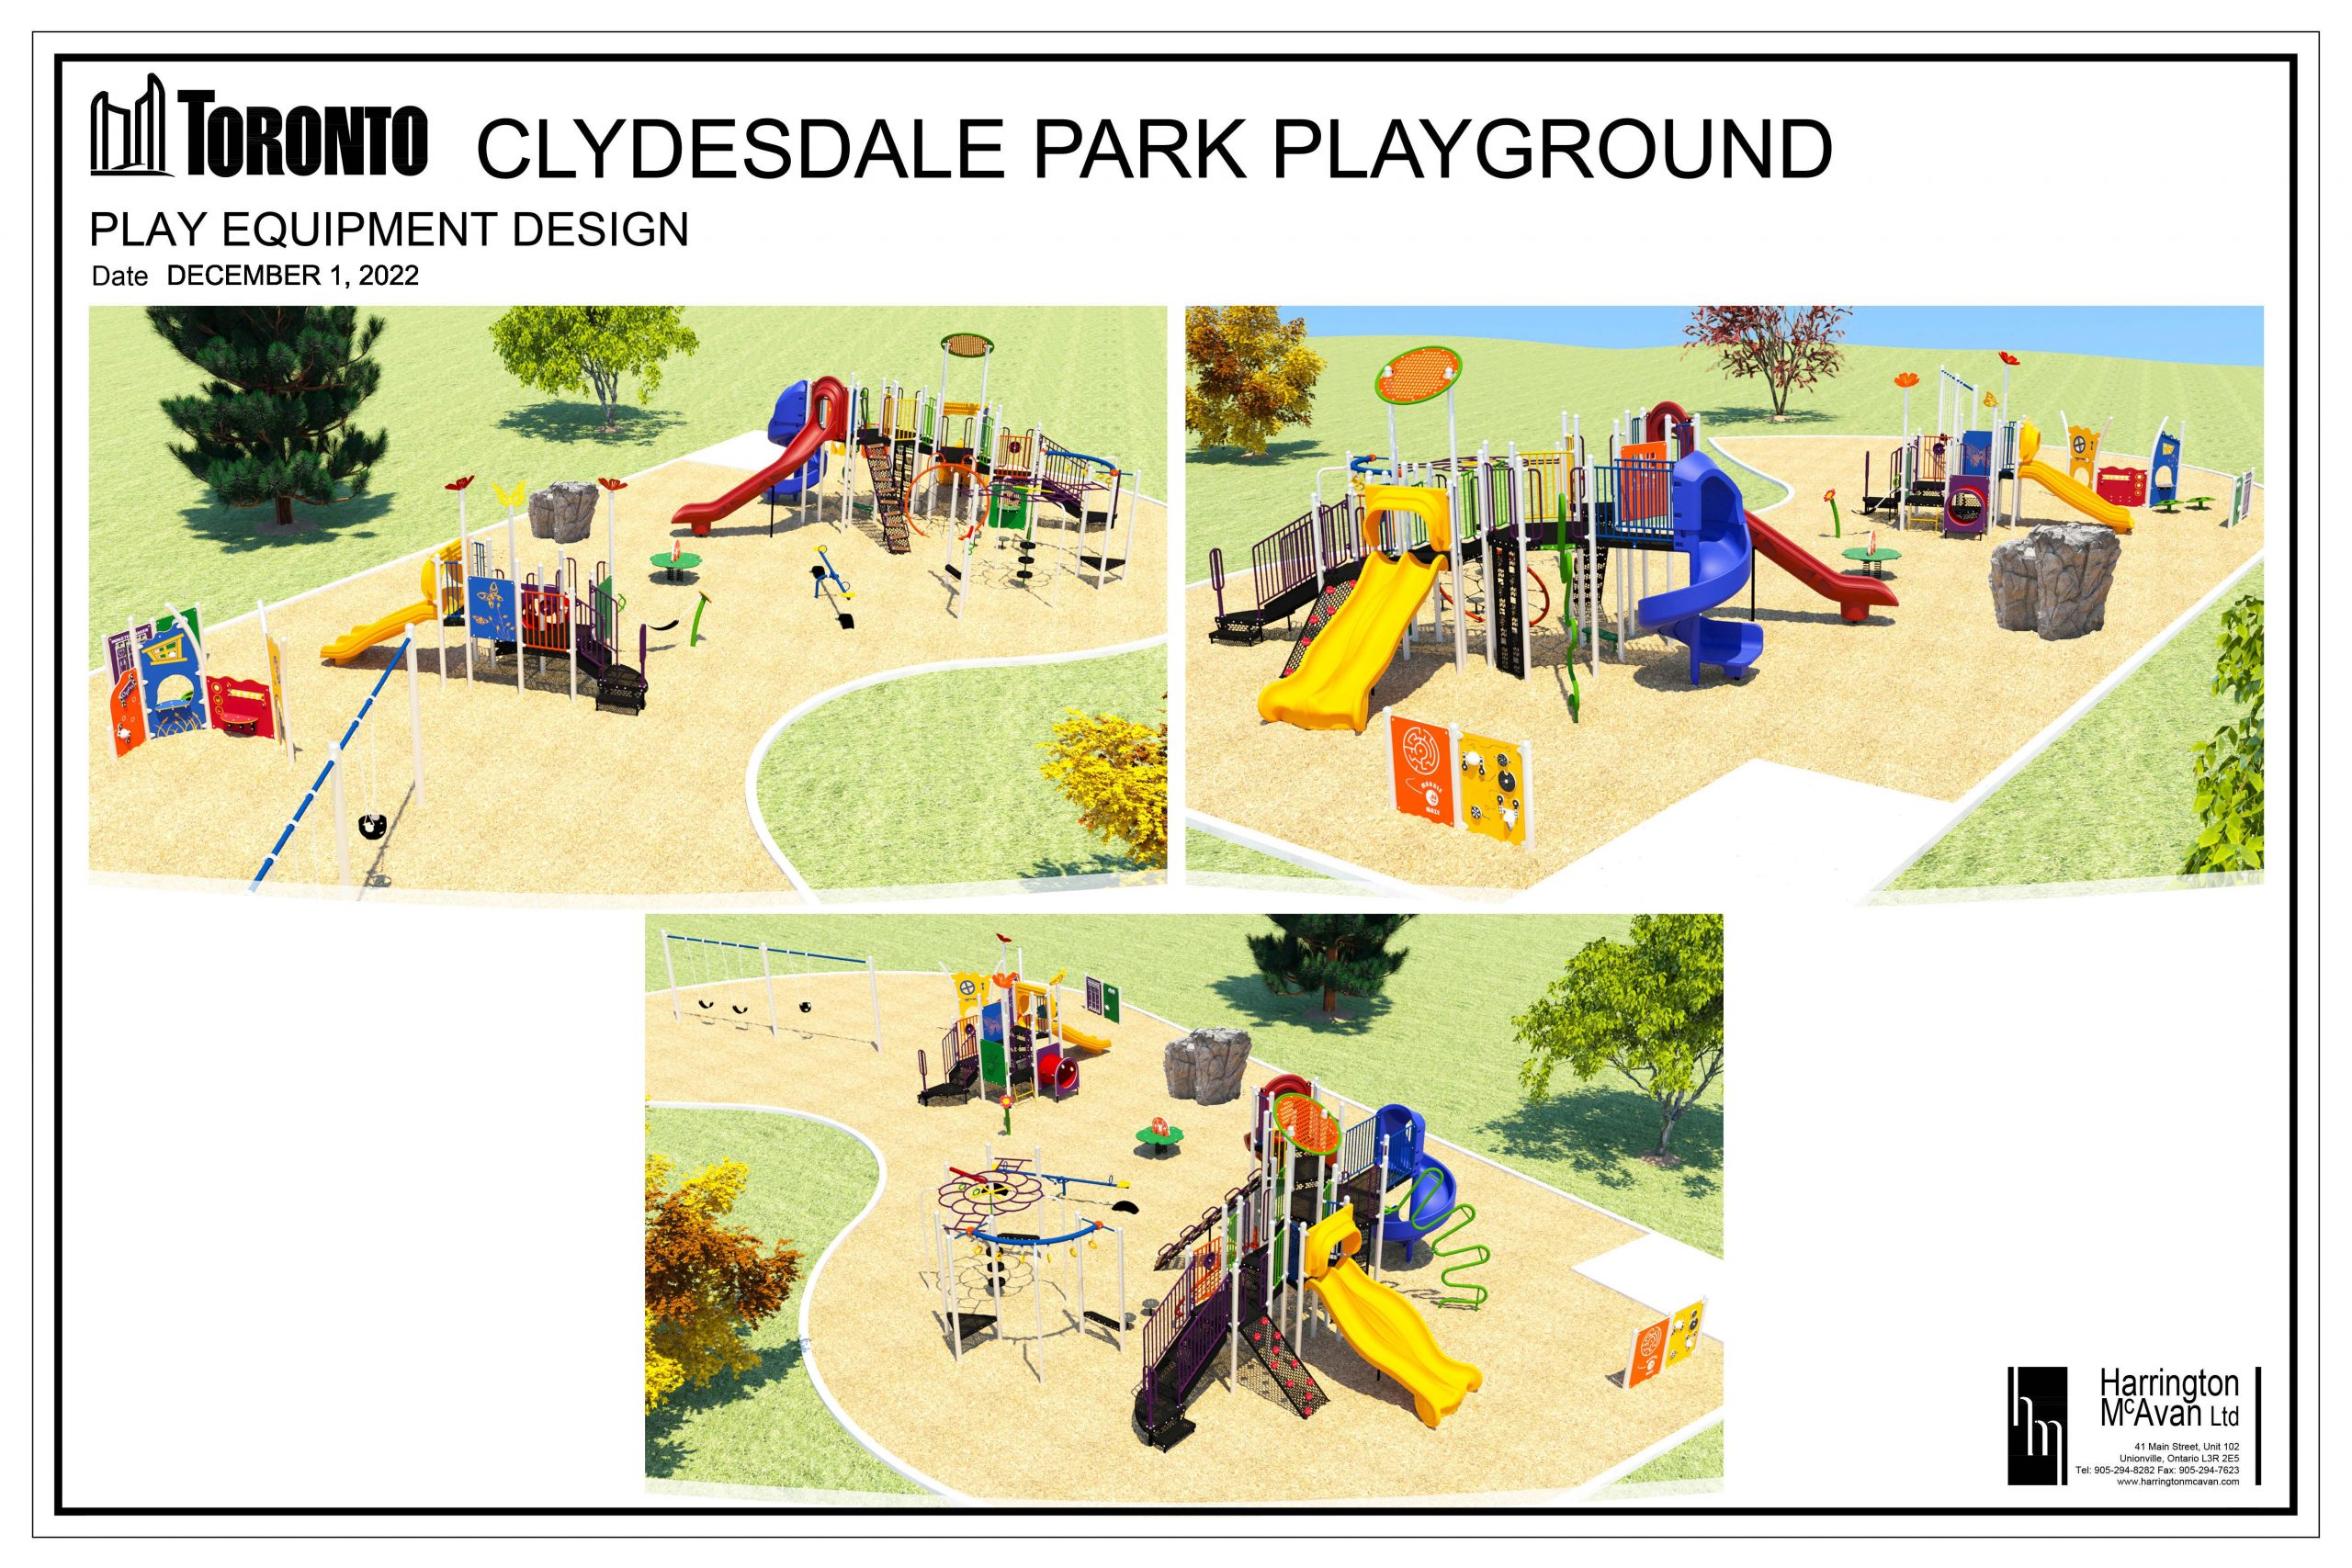 Three images from different angles of the proposed play equipment. It shows play structures in primary colours including senior and junior play structures, standalone play features and a swing set.